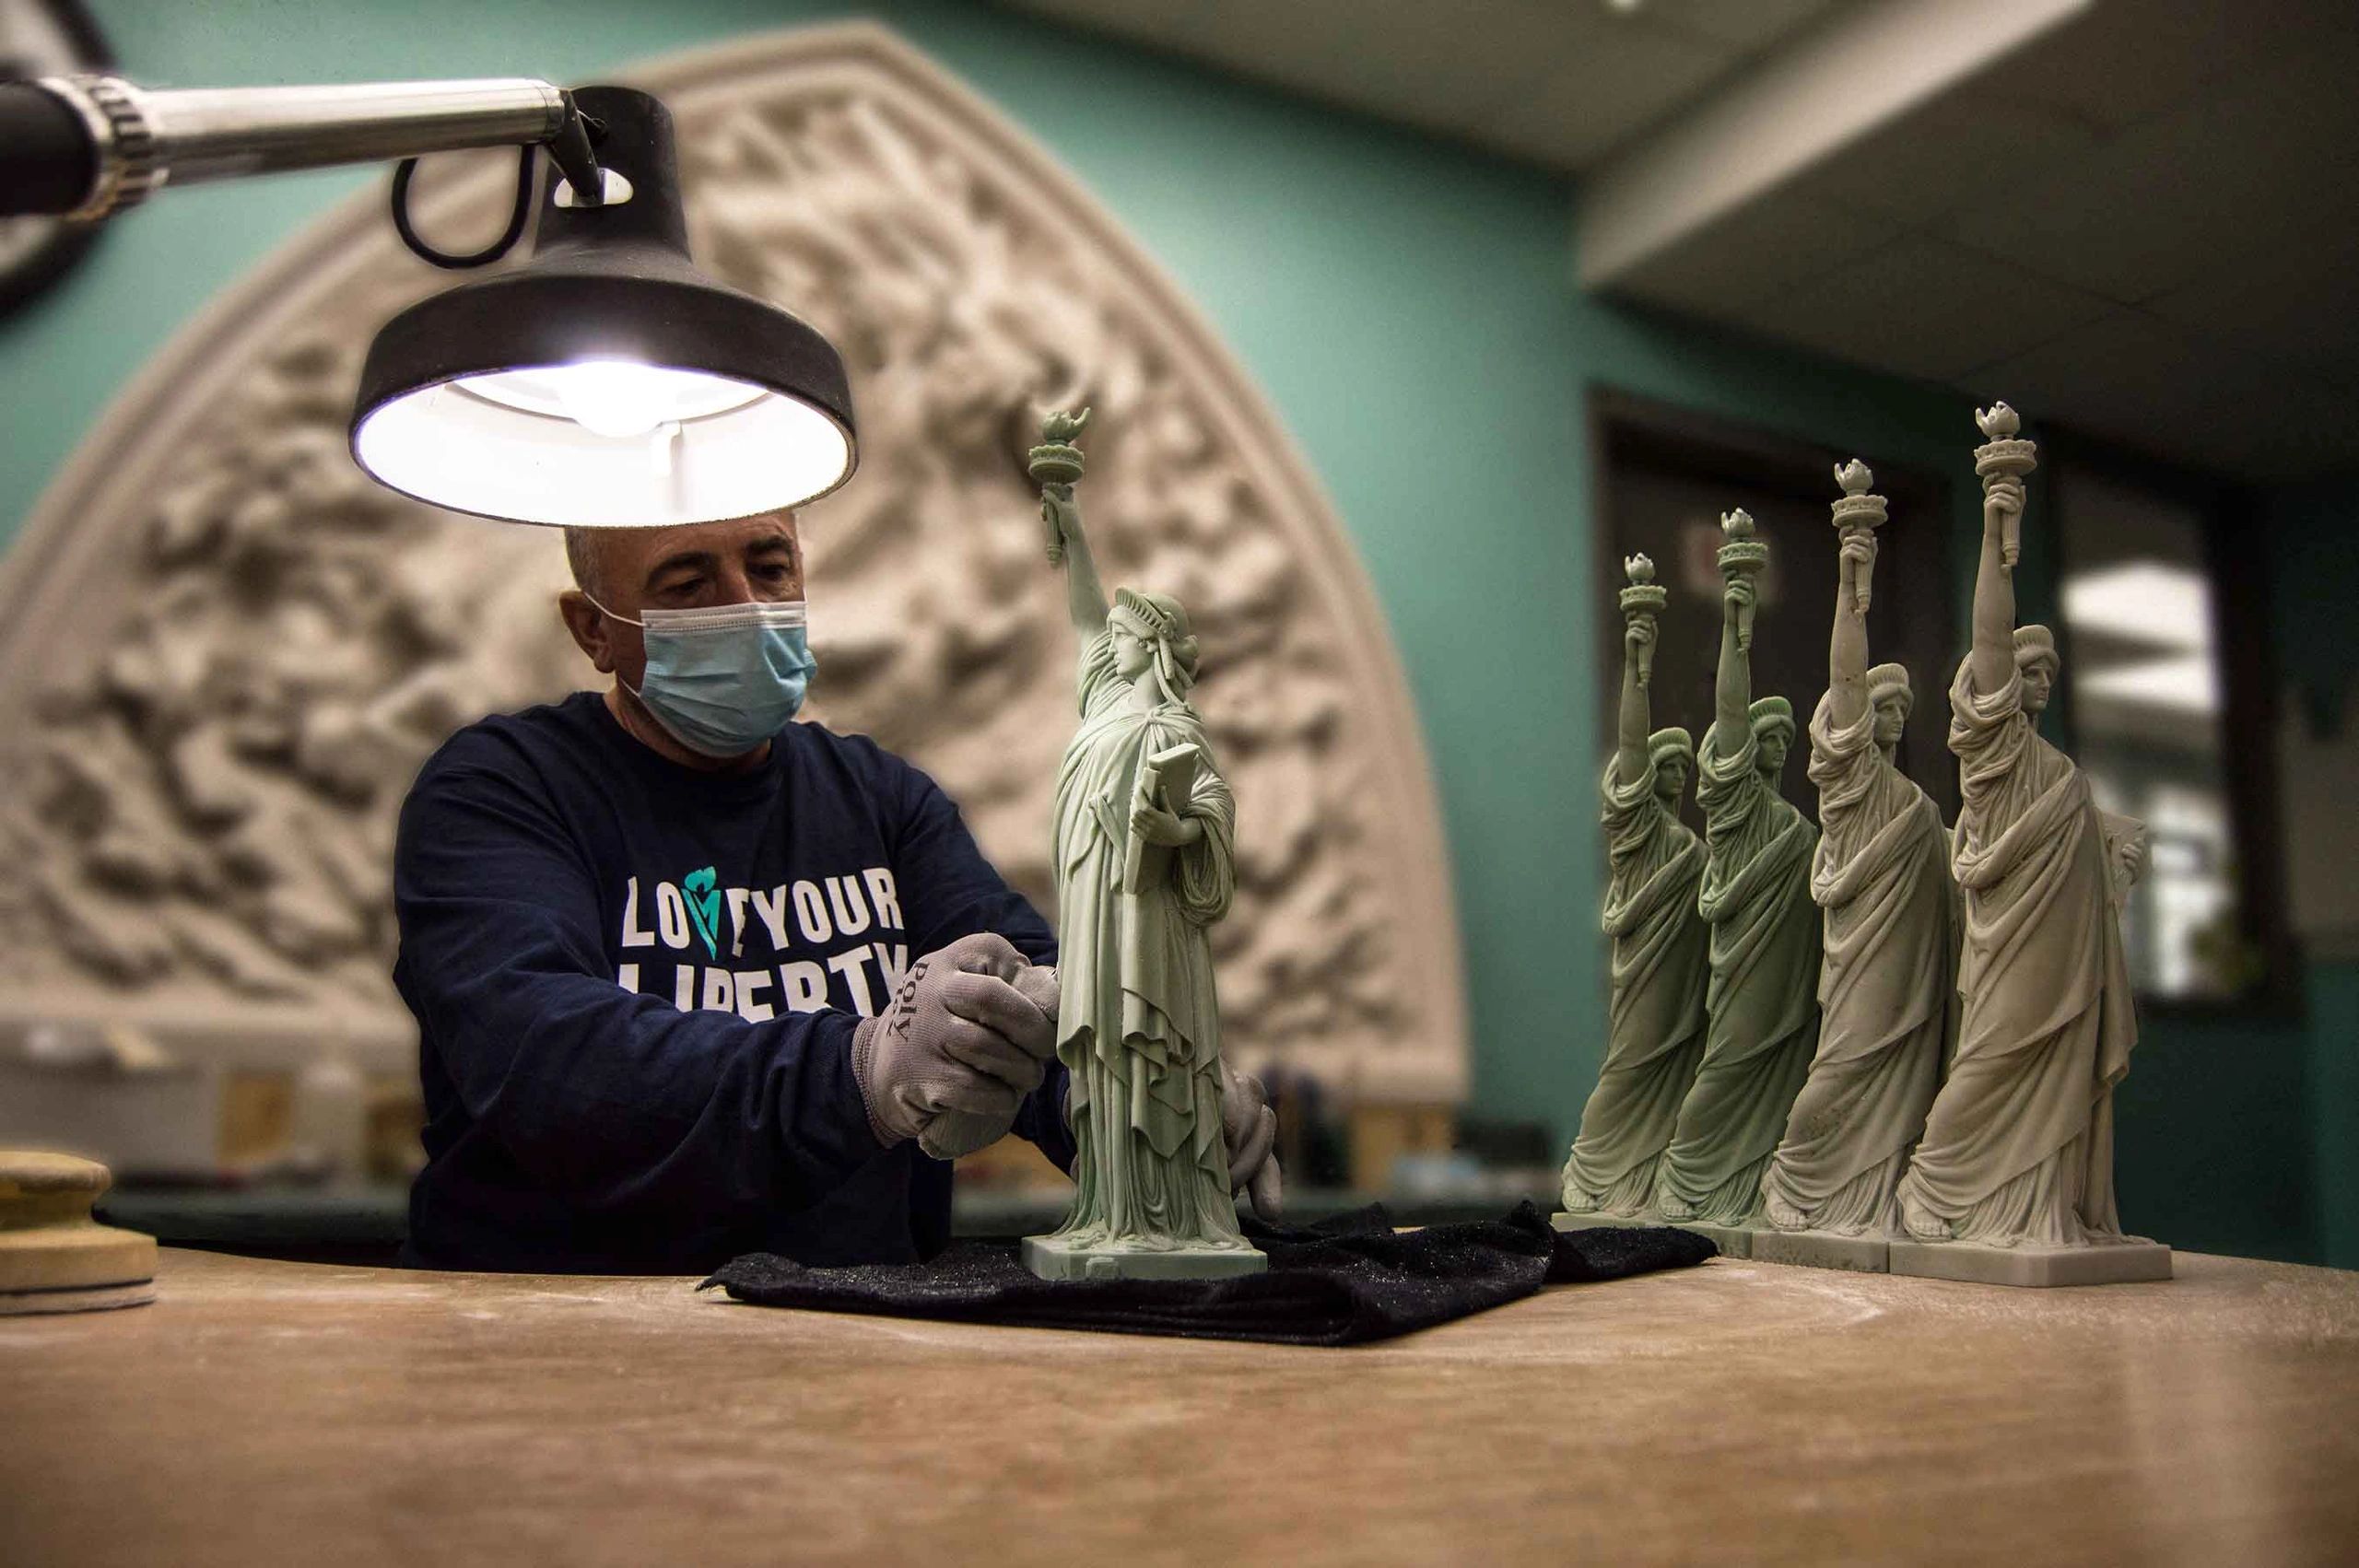 Making of the Statue of Liberty replica in the New York City factory. Photo: Marta Skrzynska